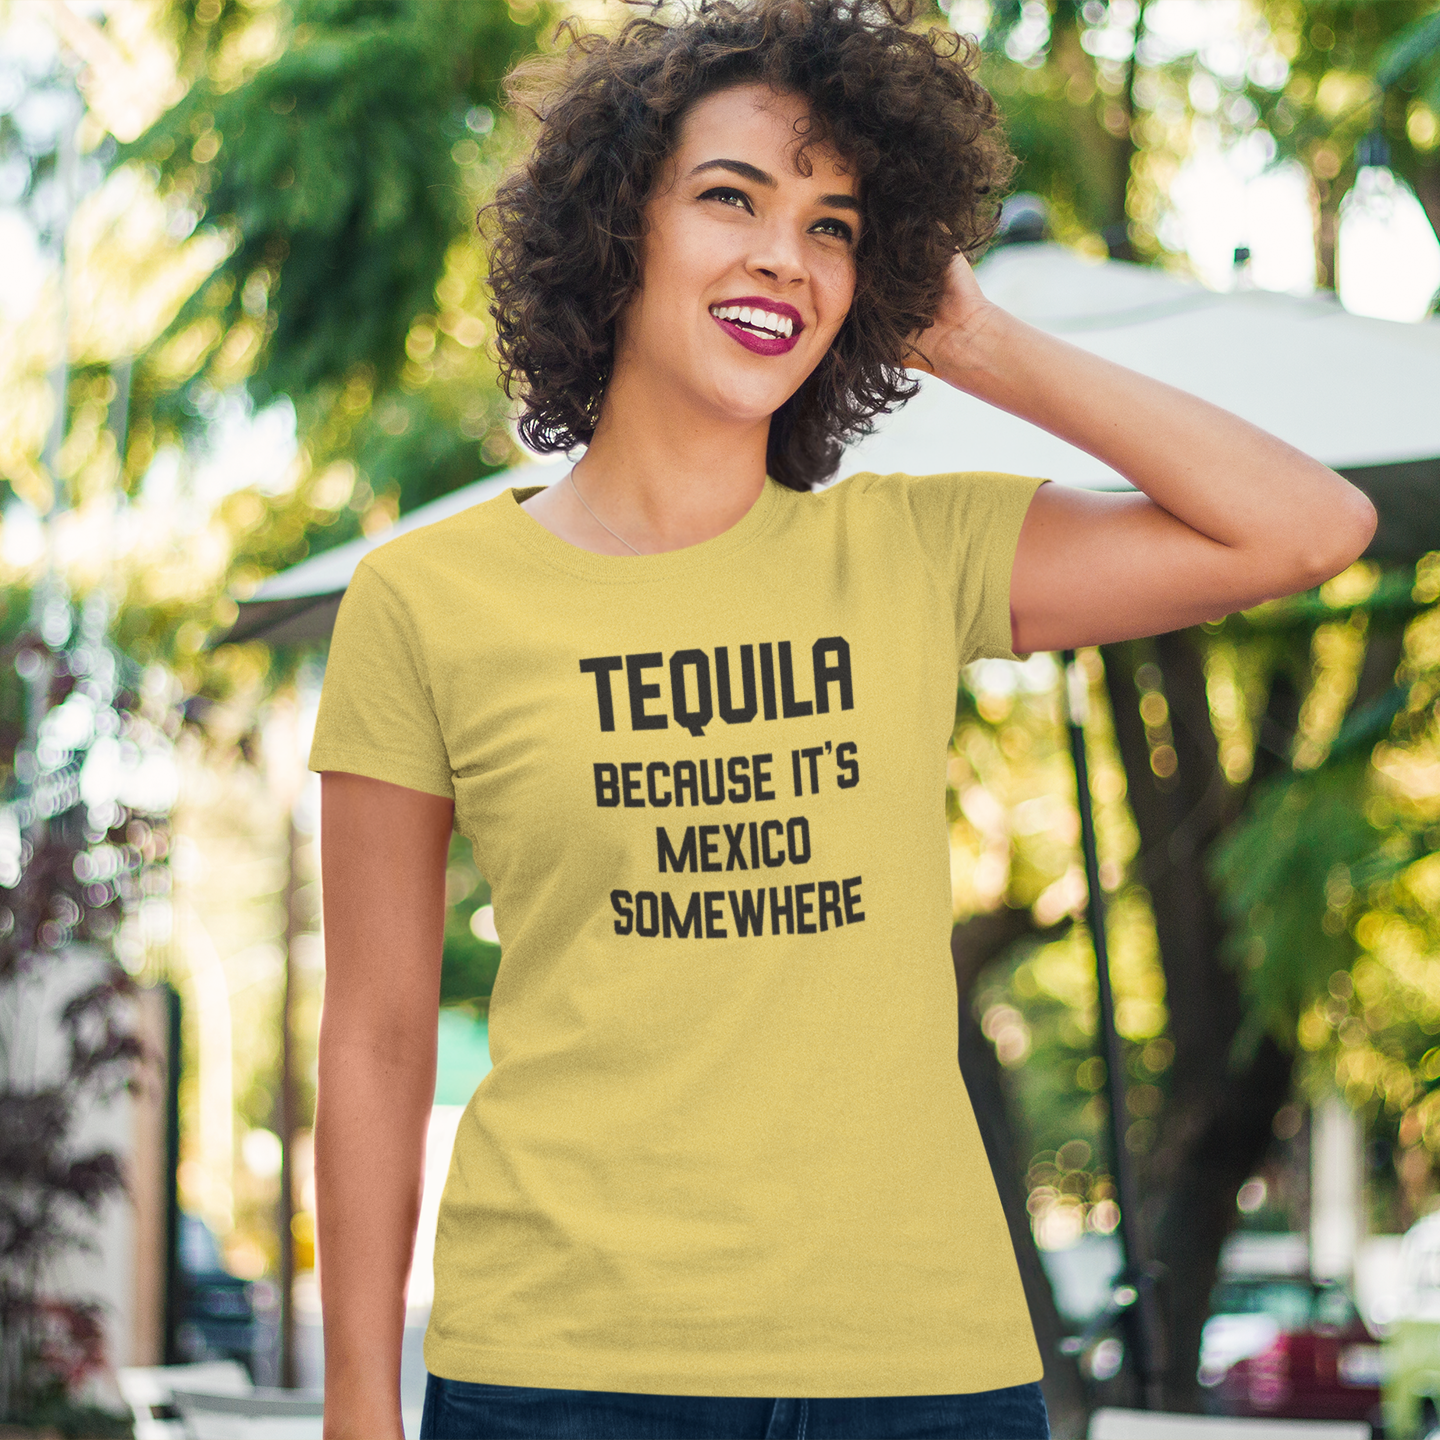 'Tequila, because it's Mexico somewhere' adult shirt